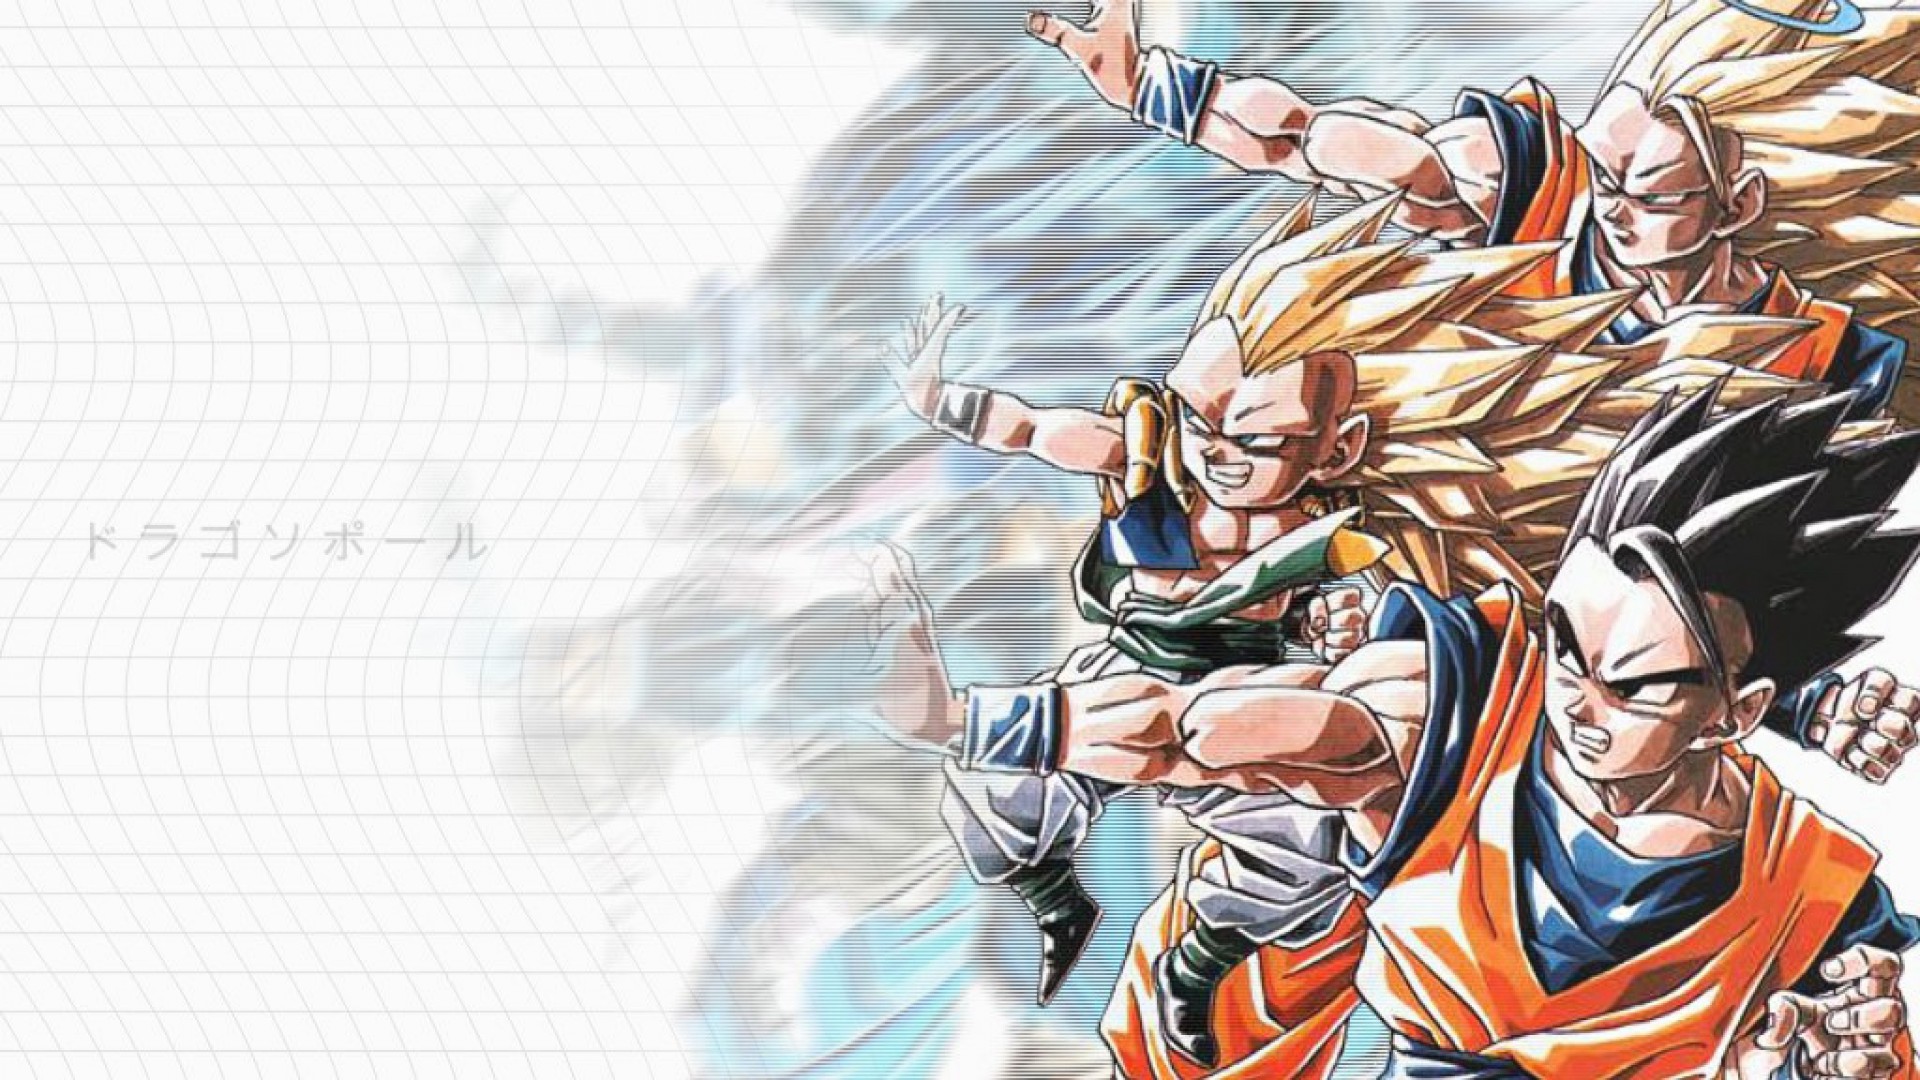 Dragon Ball Z Wallpapers Best Wallpapers